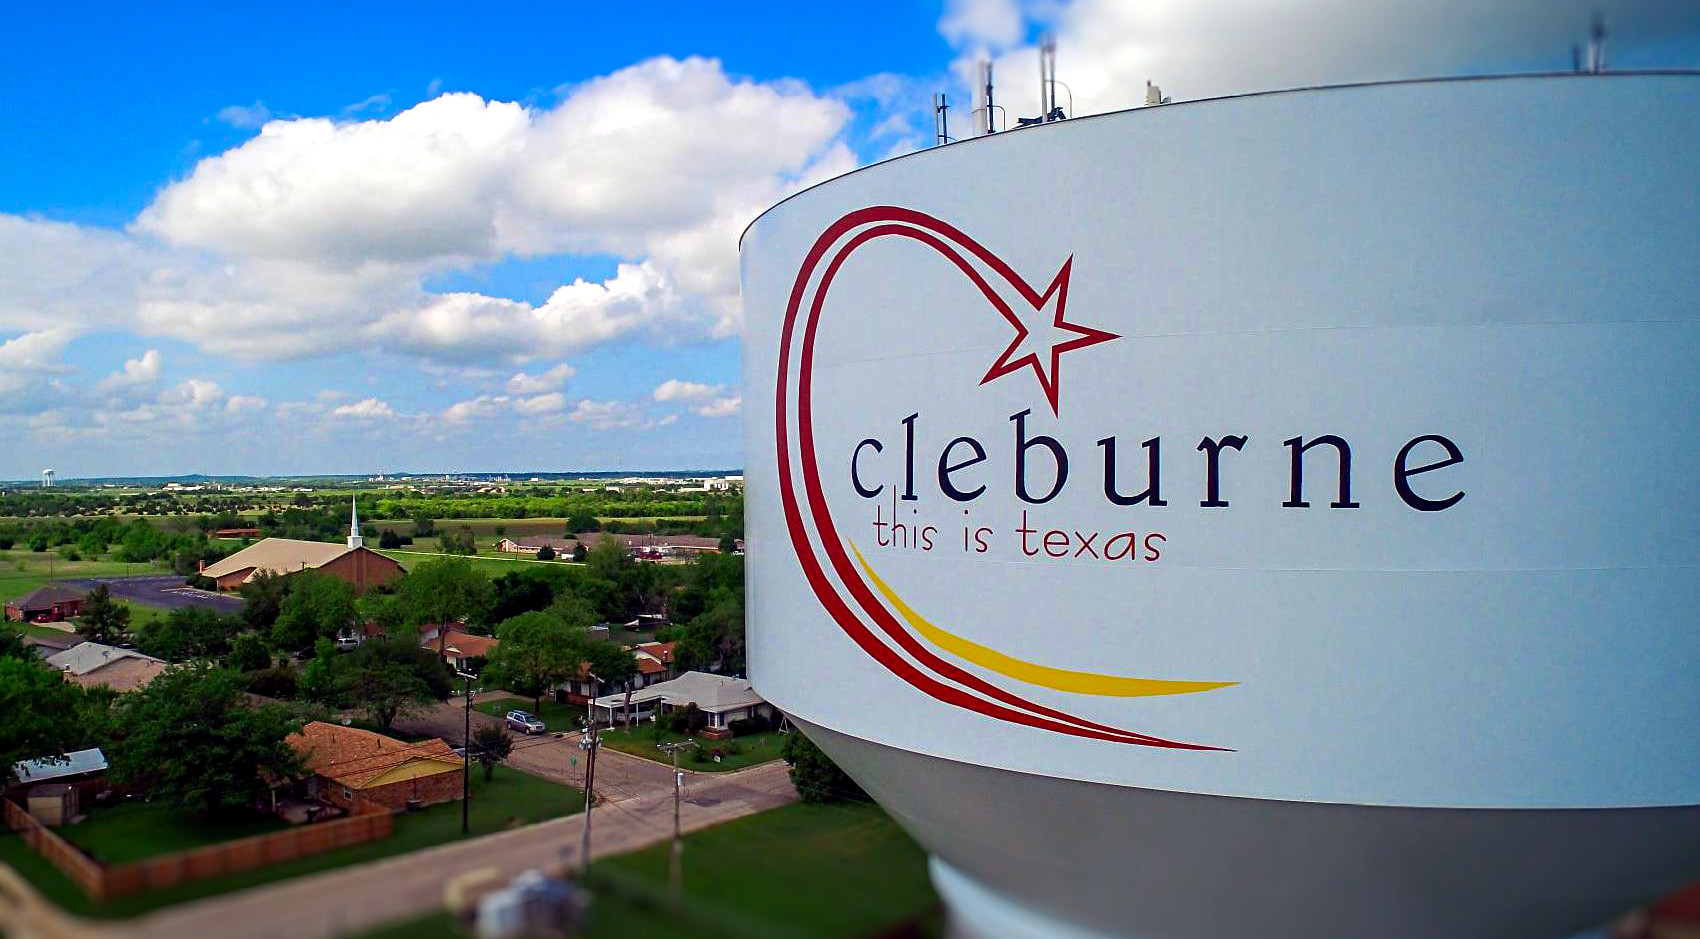 Sell My House Fast In Cleburne Texas featured image